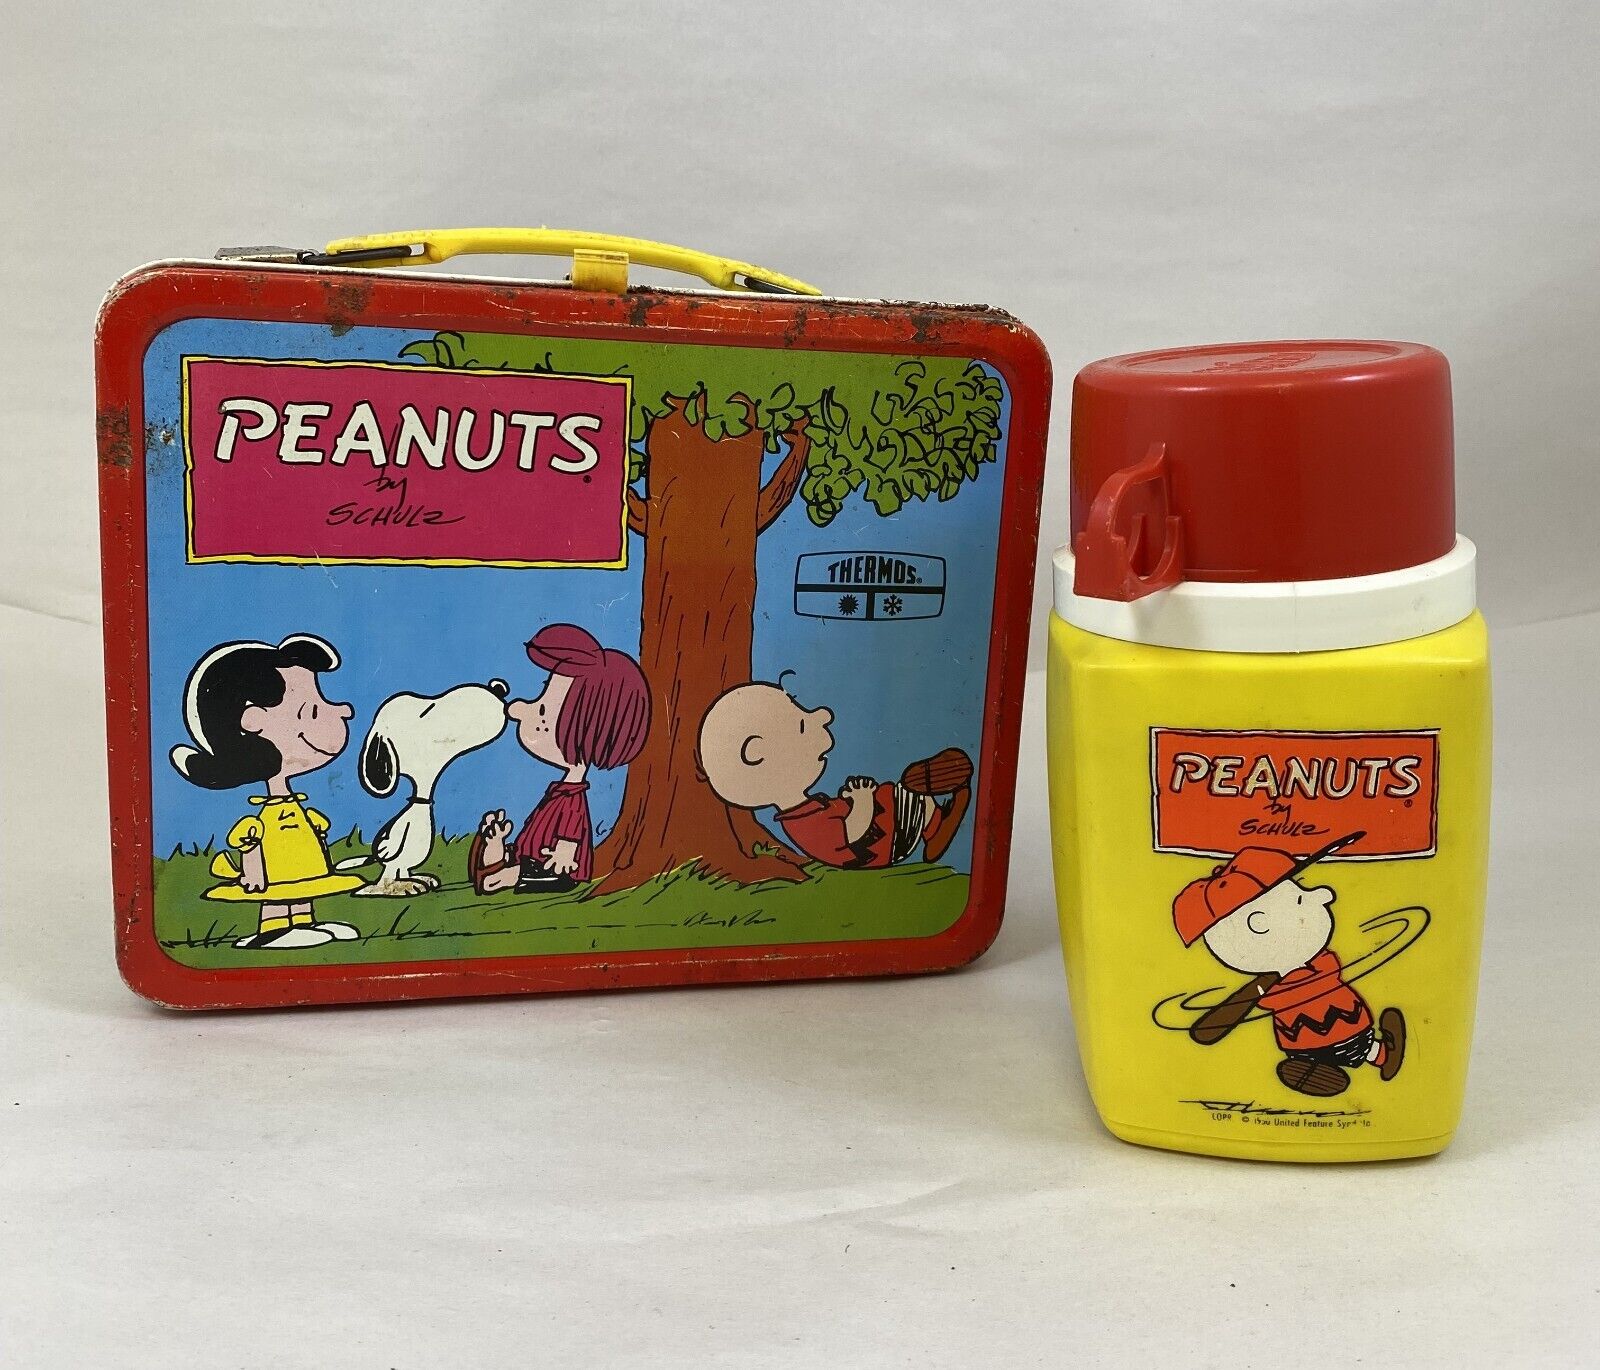 1973 PEANUTS LUNCH BOX WITH THERMOS CHARLIE BROWN SNOOPY PSYCHIATRIC HELP, USED